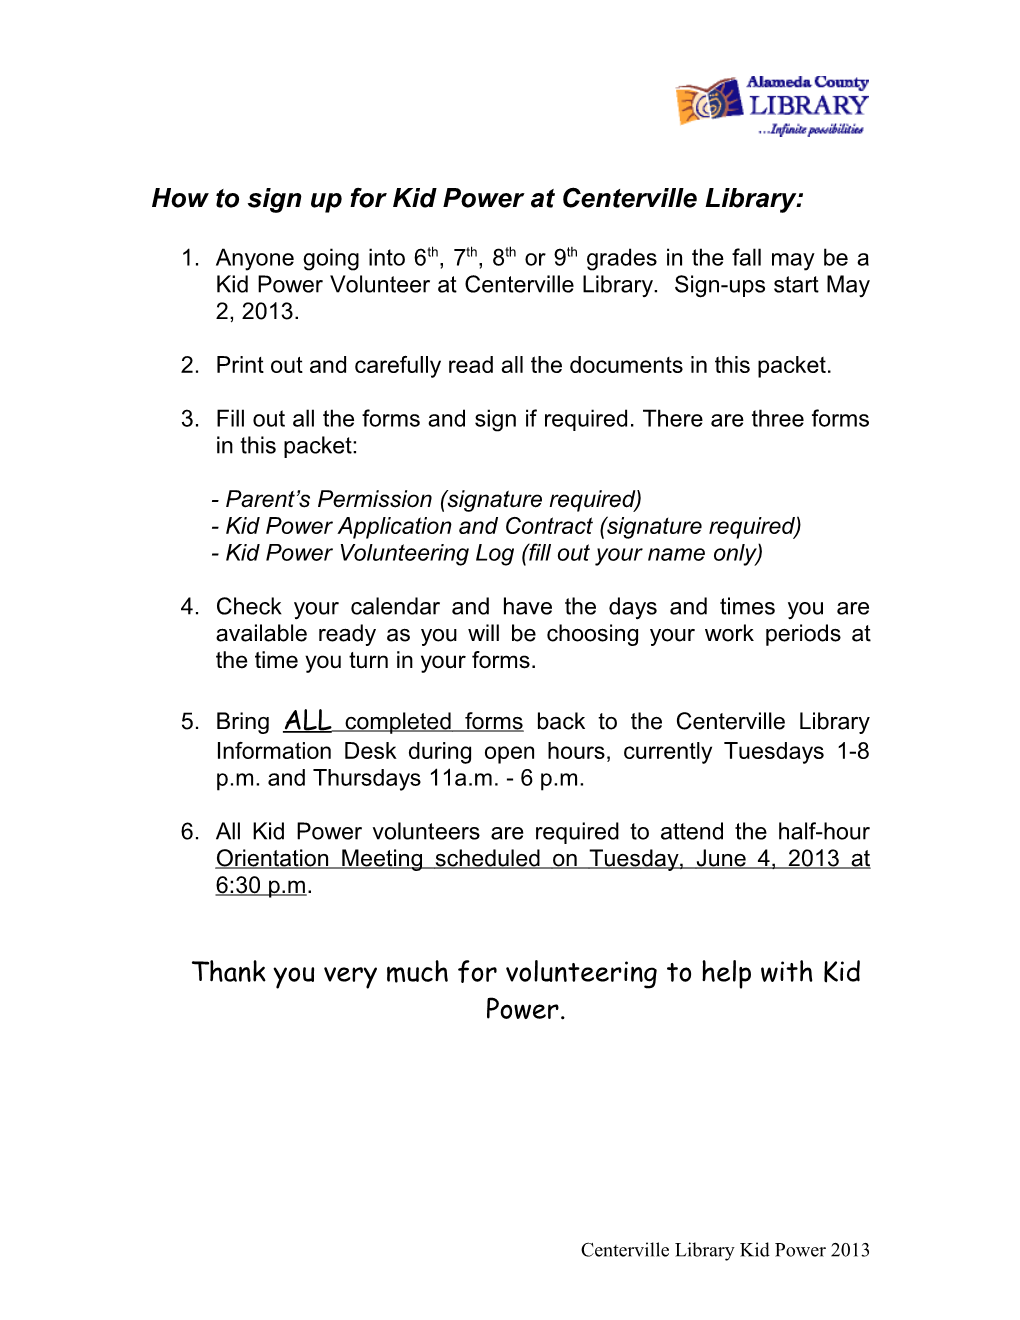 How to Sign up for Kidpower at the Centerville Library